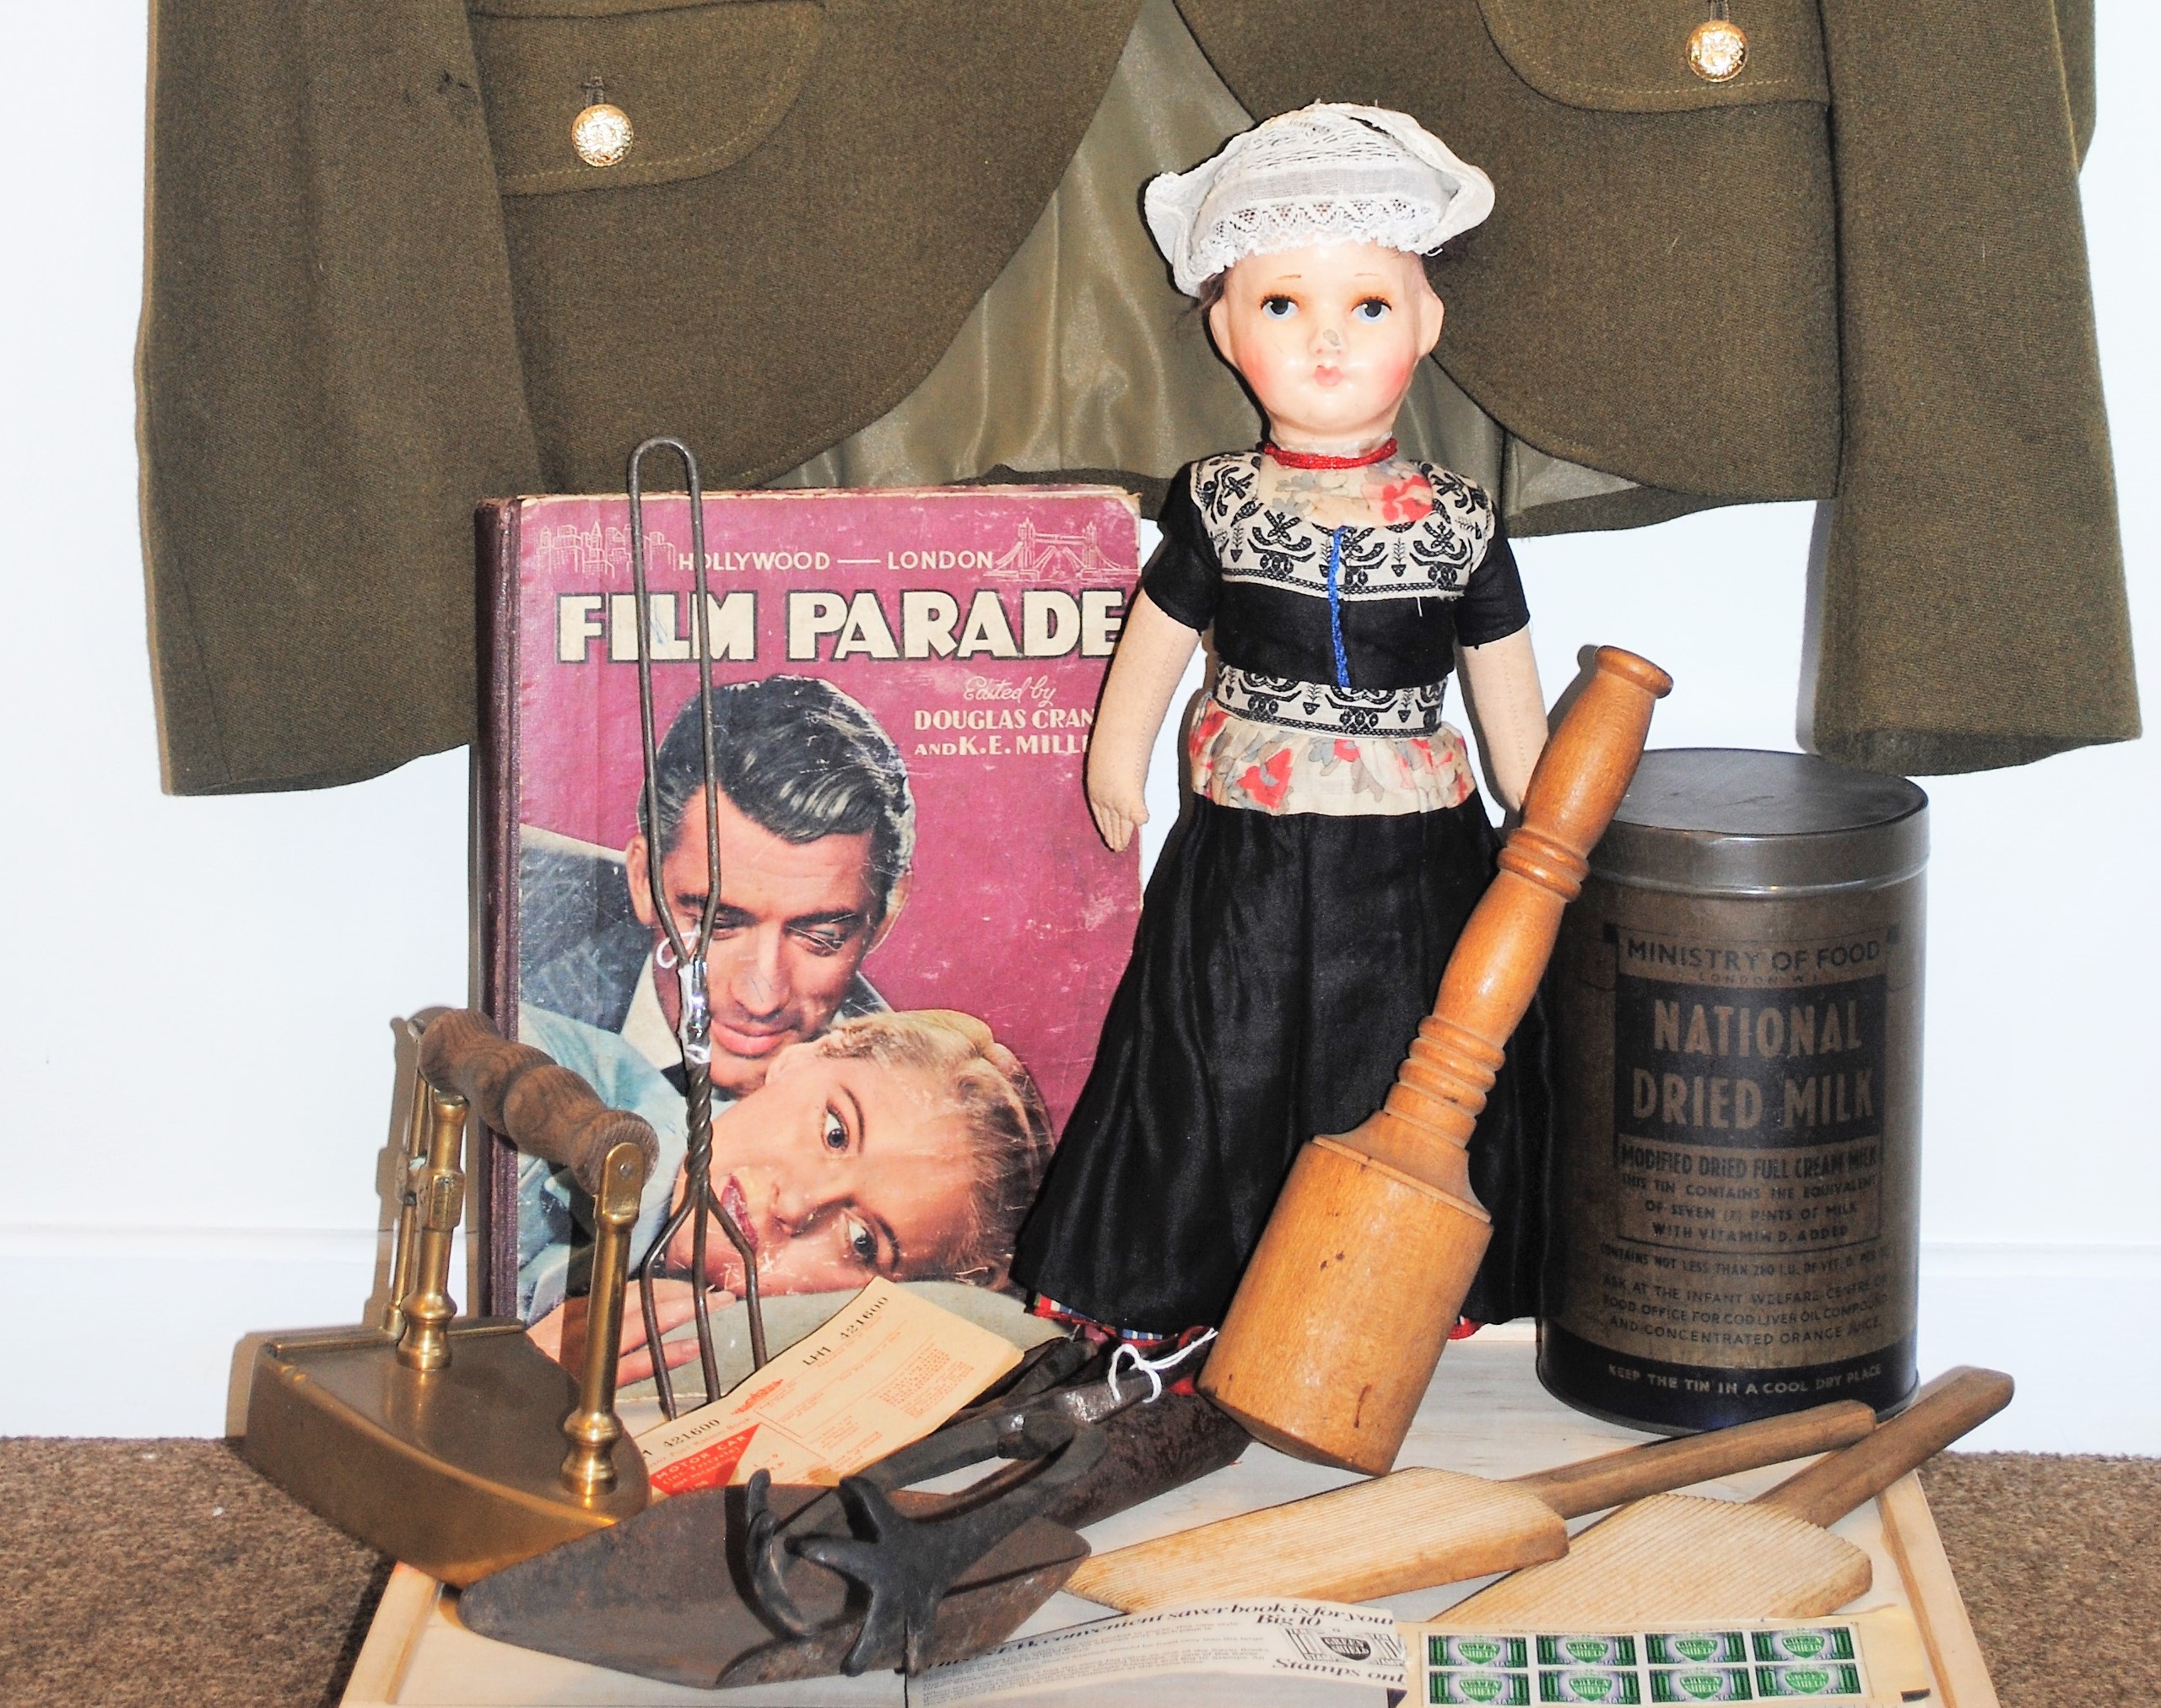 Some of the memorabilia which aims to stir people's memories.